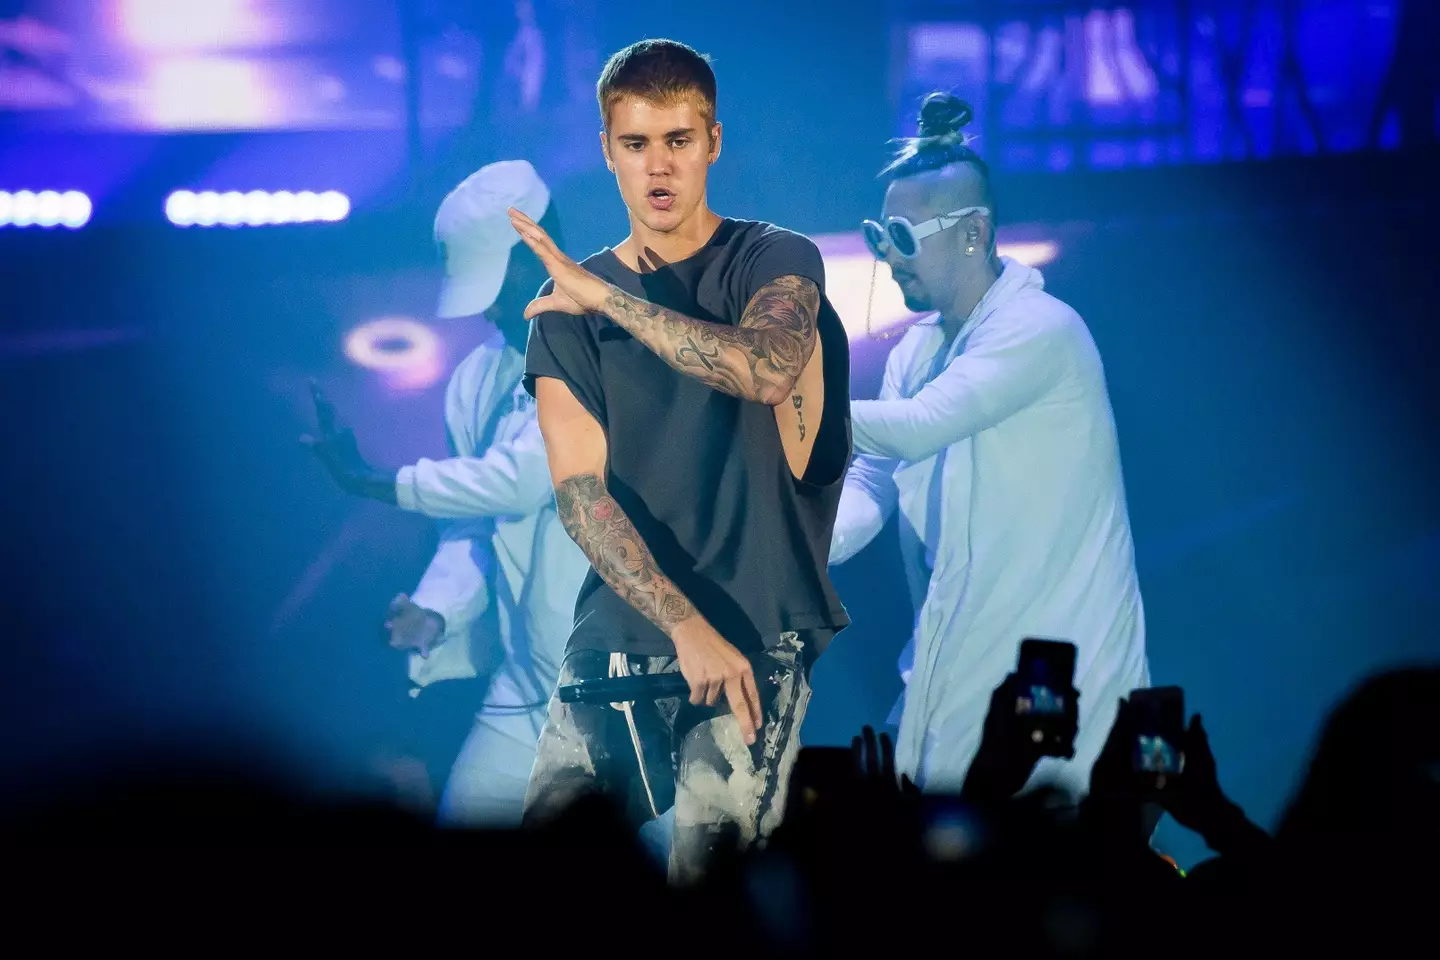 People were shocked to see a compilation of the things Bieber went through as a child star.